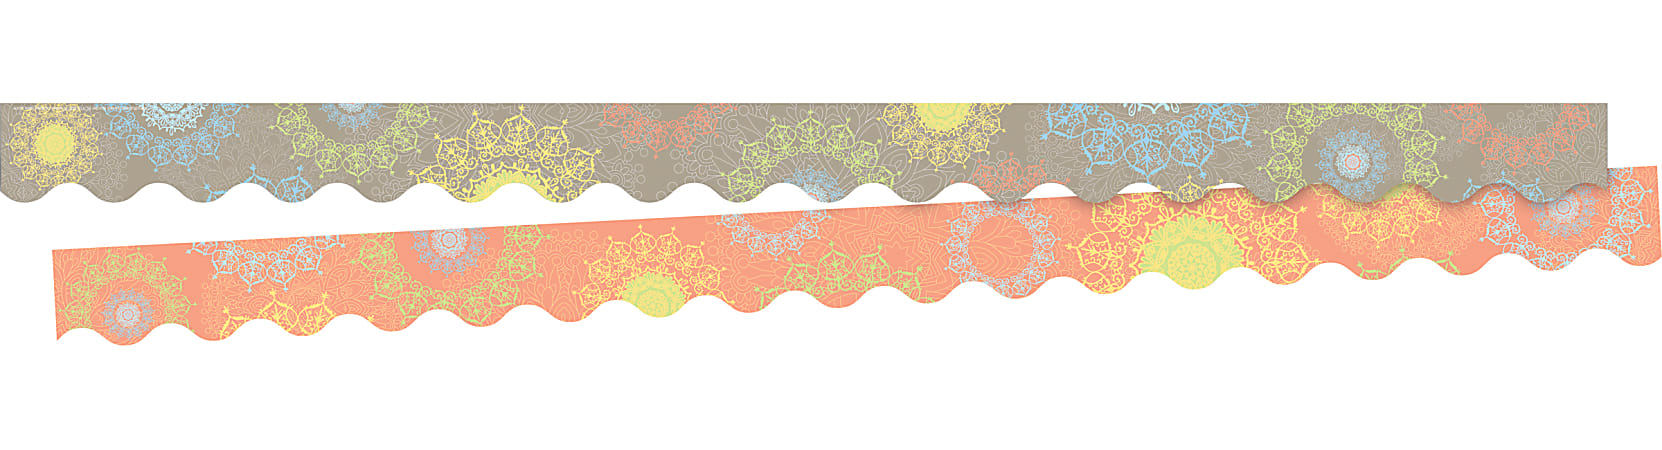 Barker Creek Double-Sided Scalloped Borders, 2-1/4" x 36", Mindfulness Sunset, 13 Strips Per Pack, Set Of 2 Packs